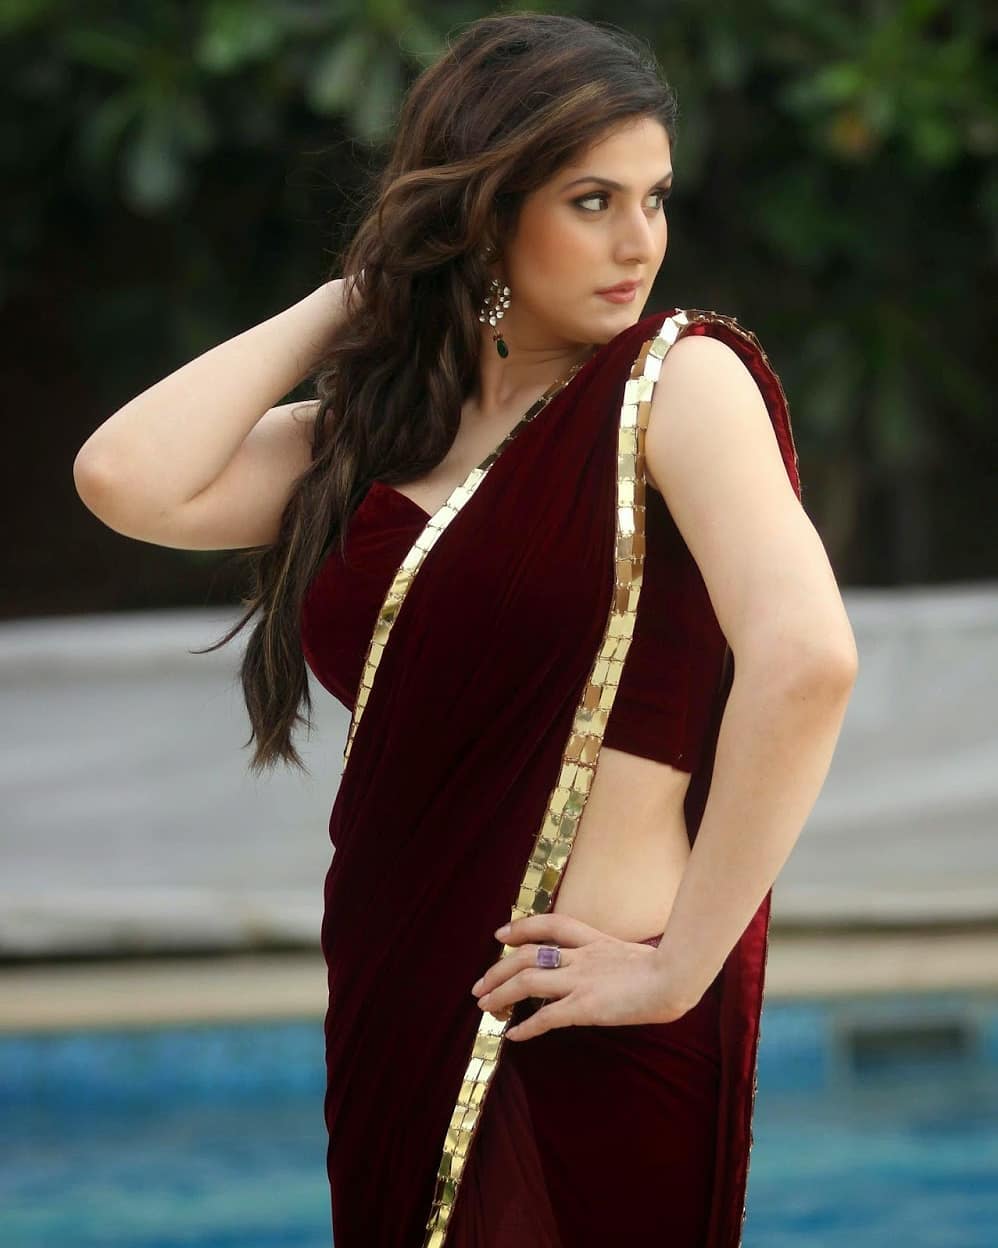 Karine Khan Showcasting Her Most Amazing Curves In A Maroon Revealing Saree